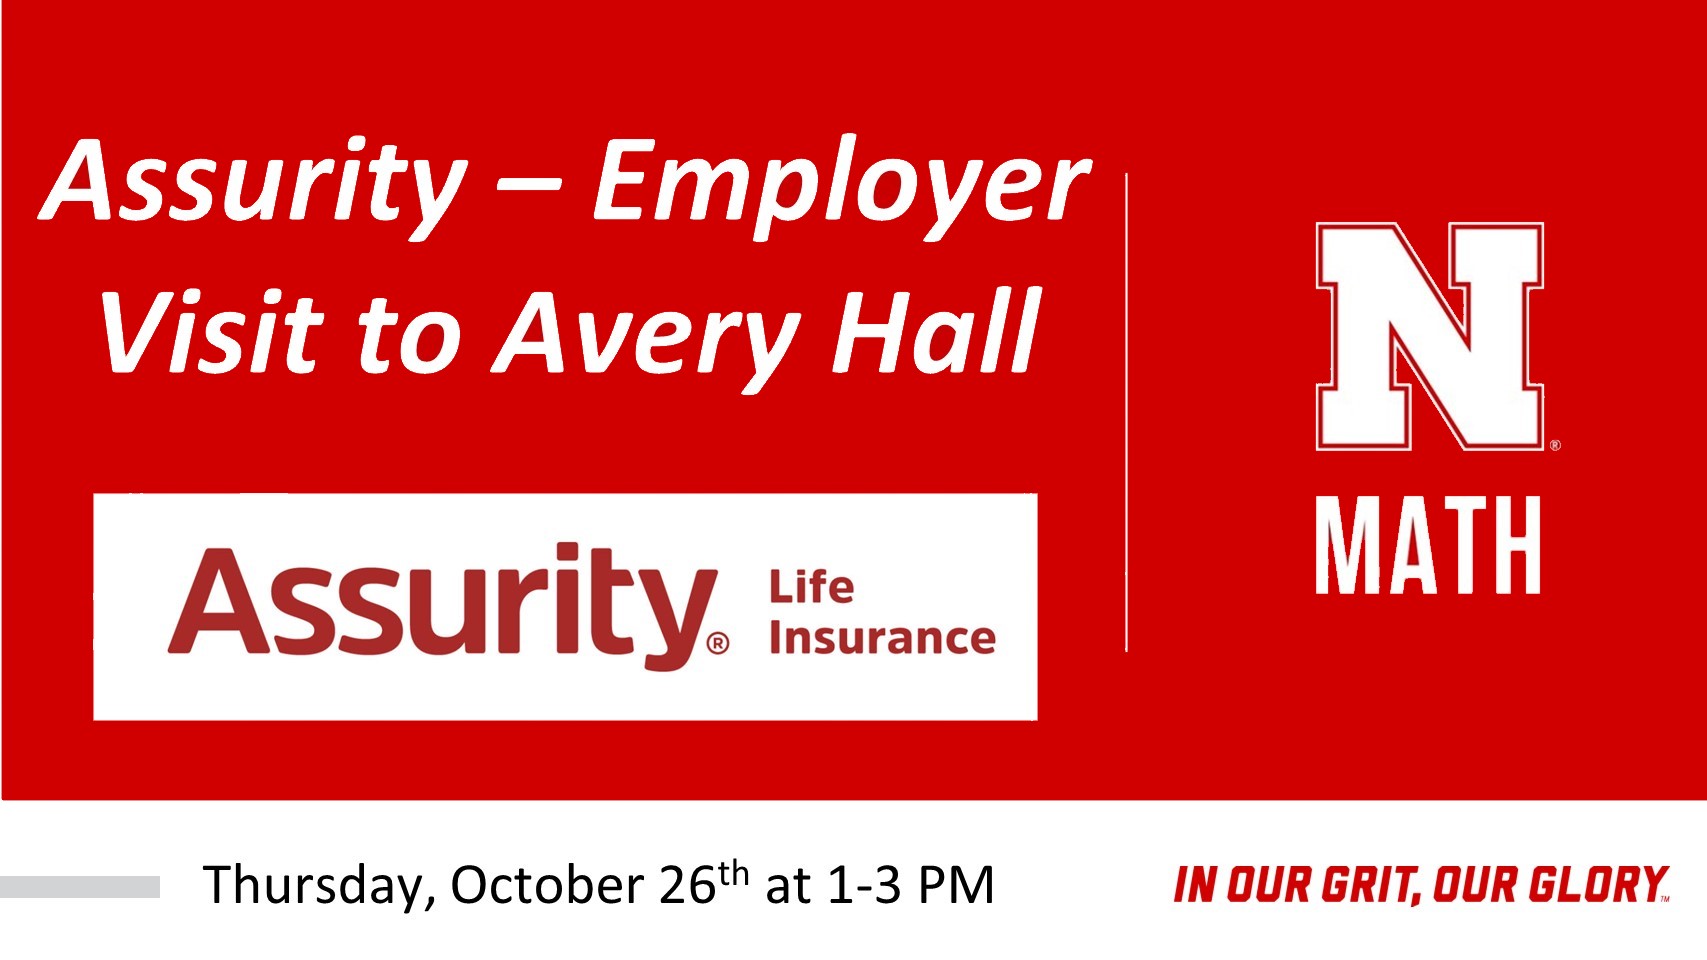 Assurity - Employer Visit to Avery Hall